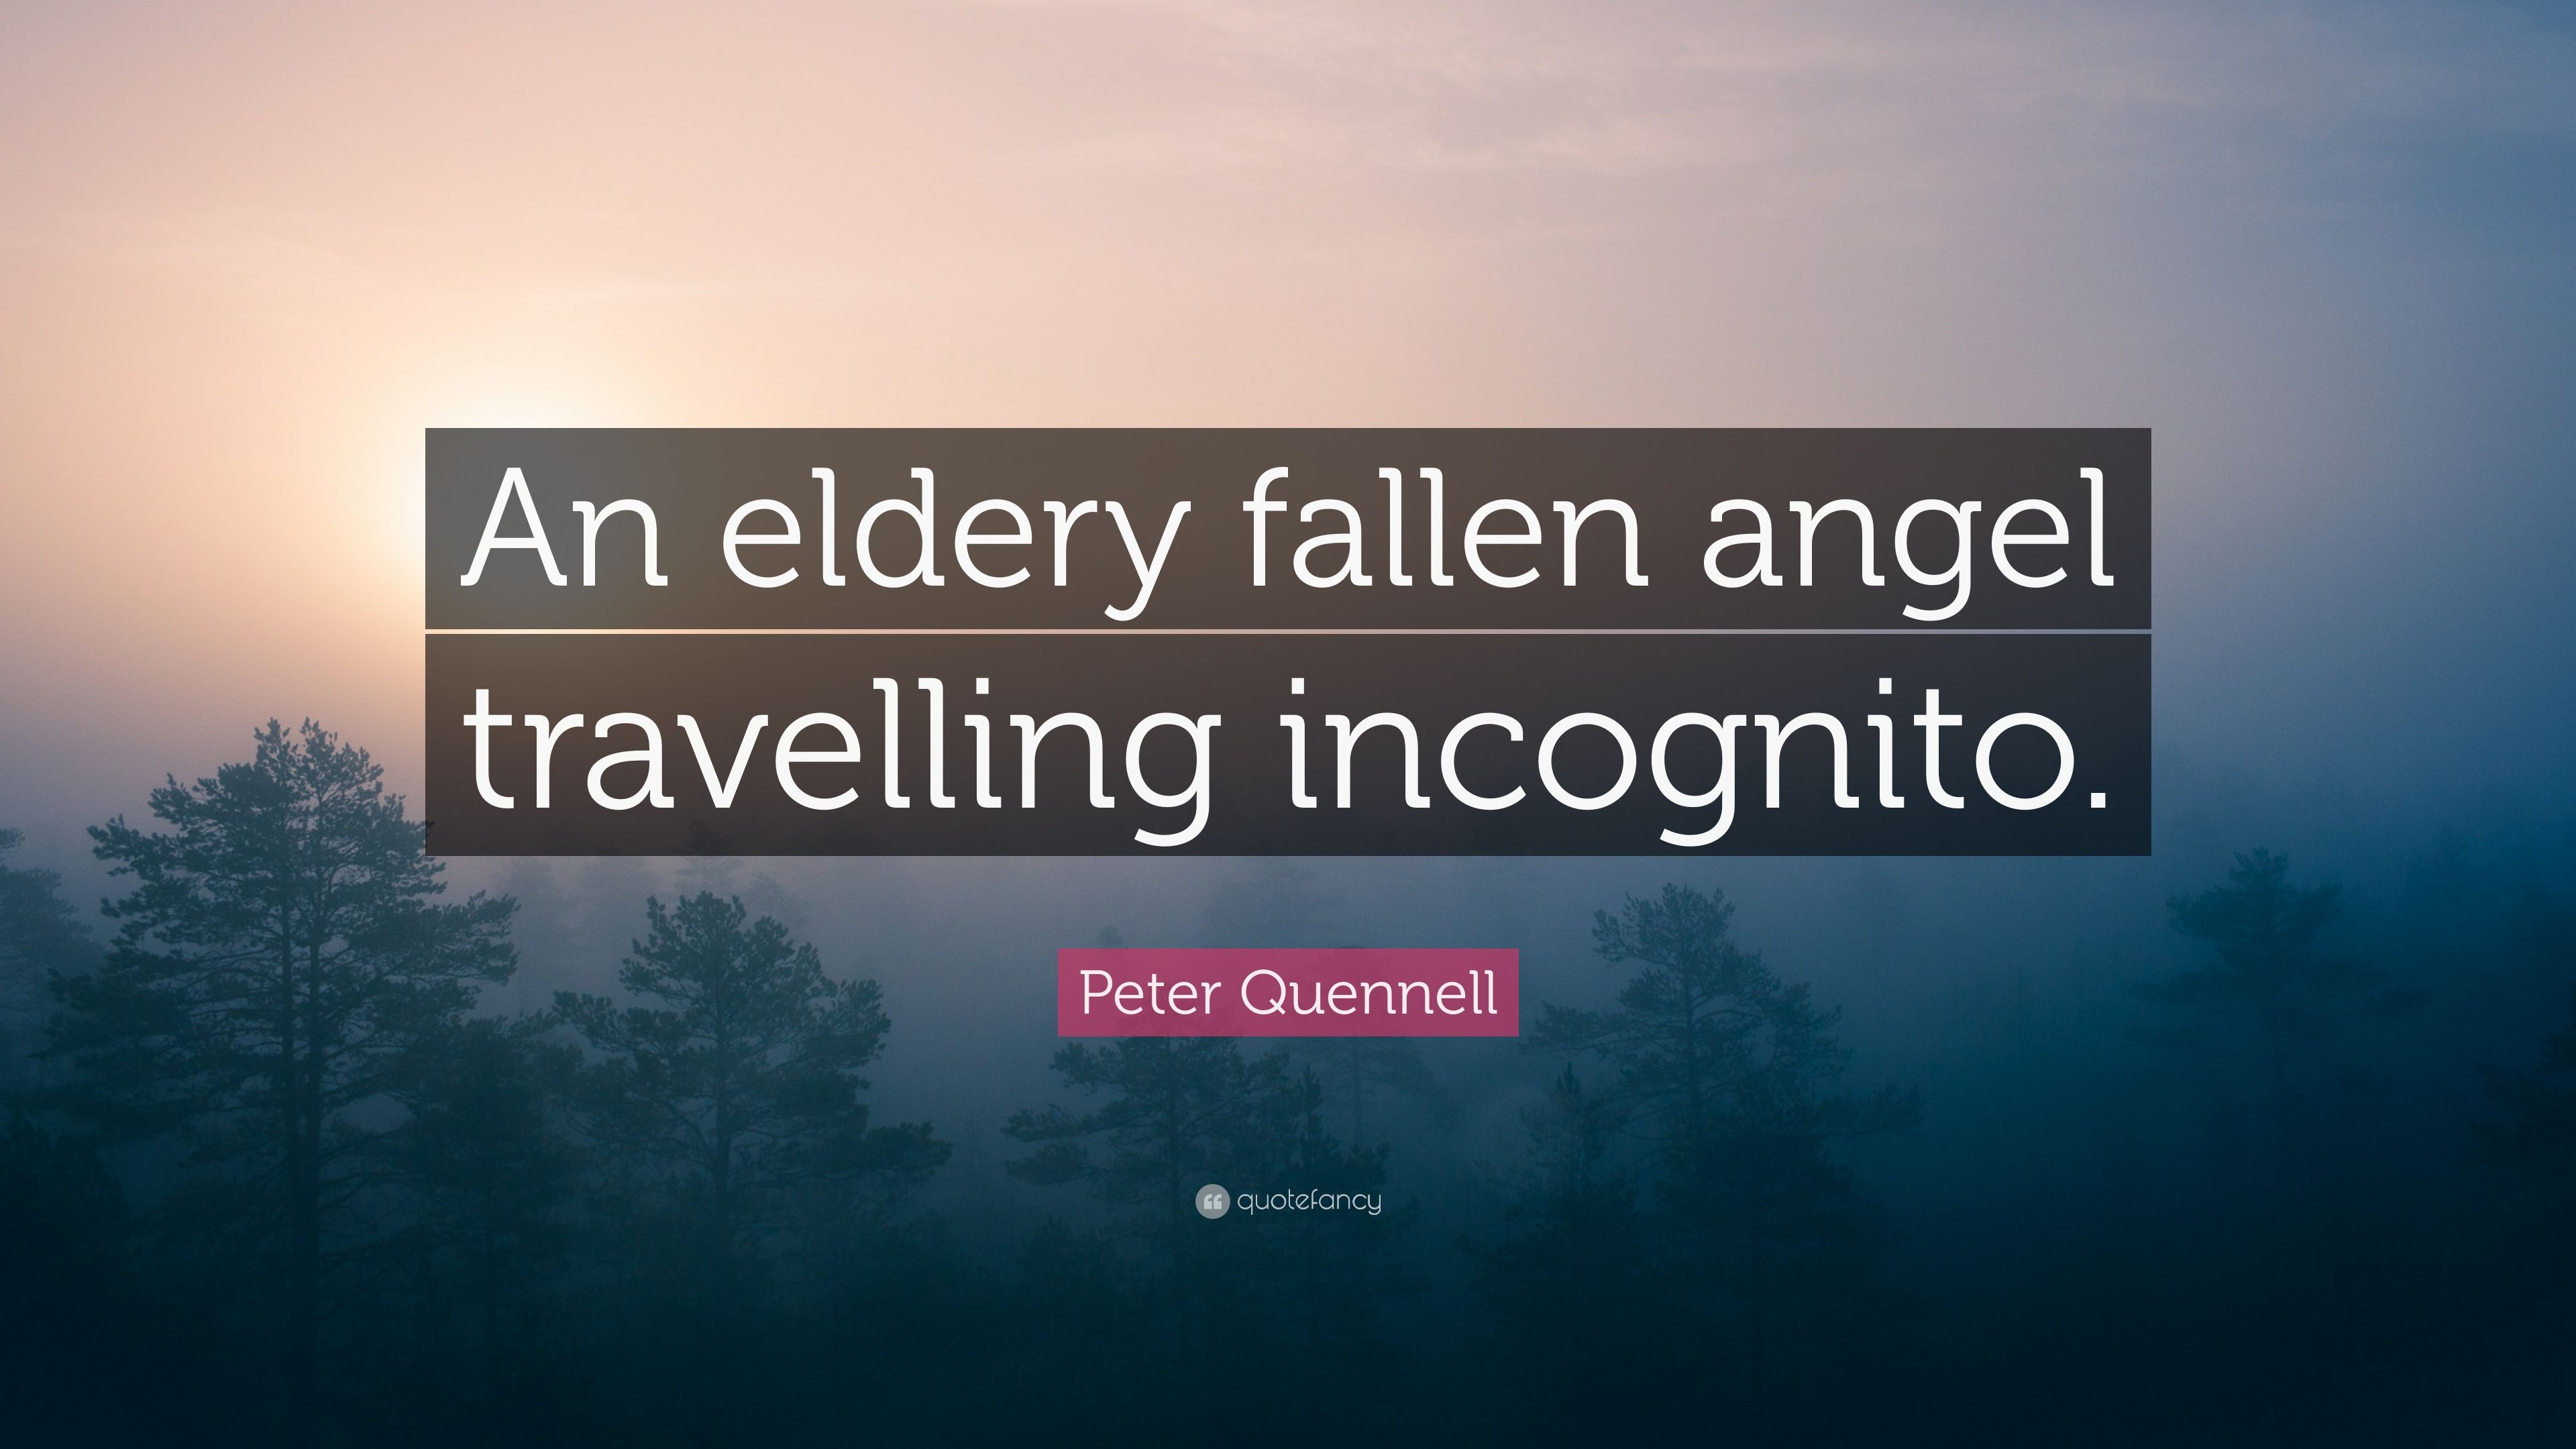 Peter Quennell Quote: “An eldery fallen angel travelling incognito.” (7 wallpaper)